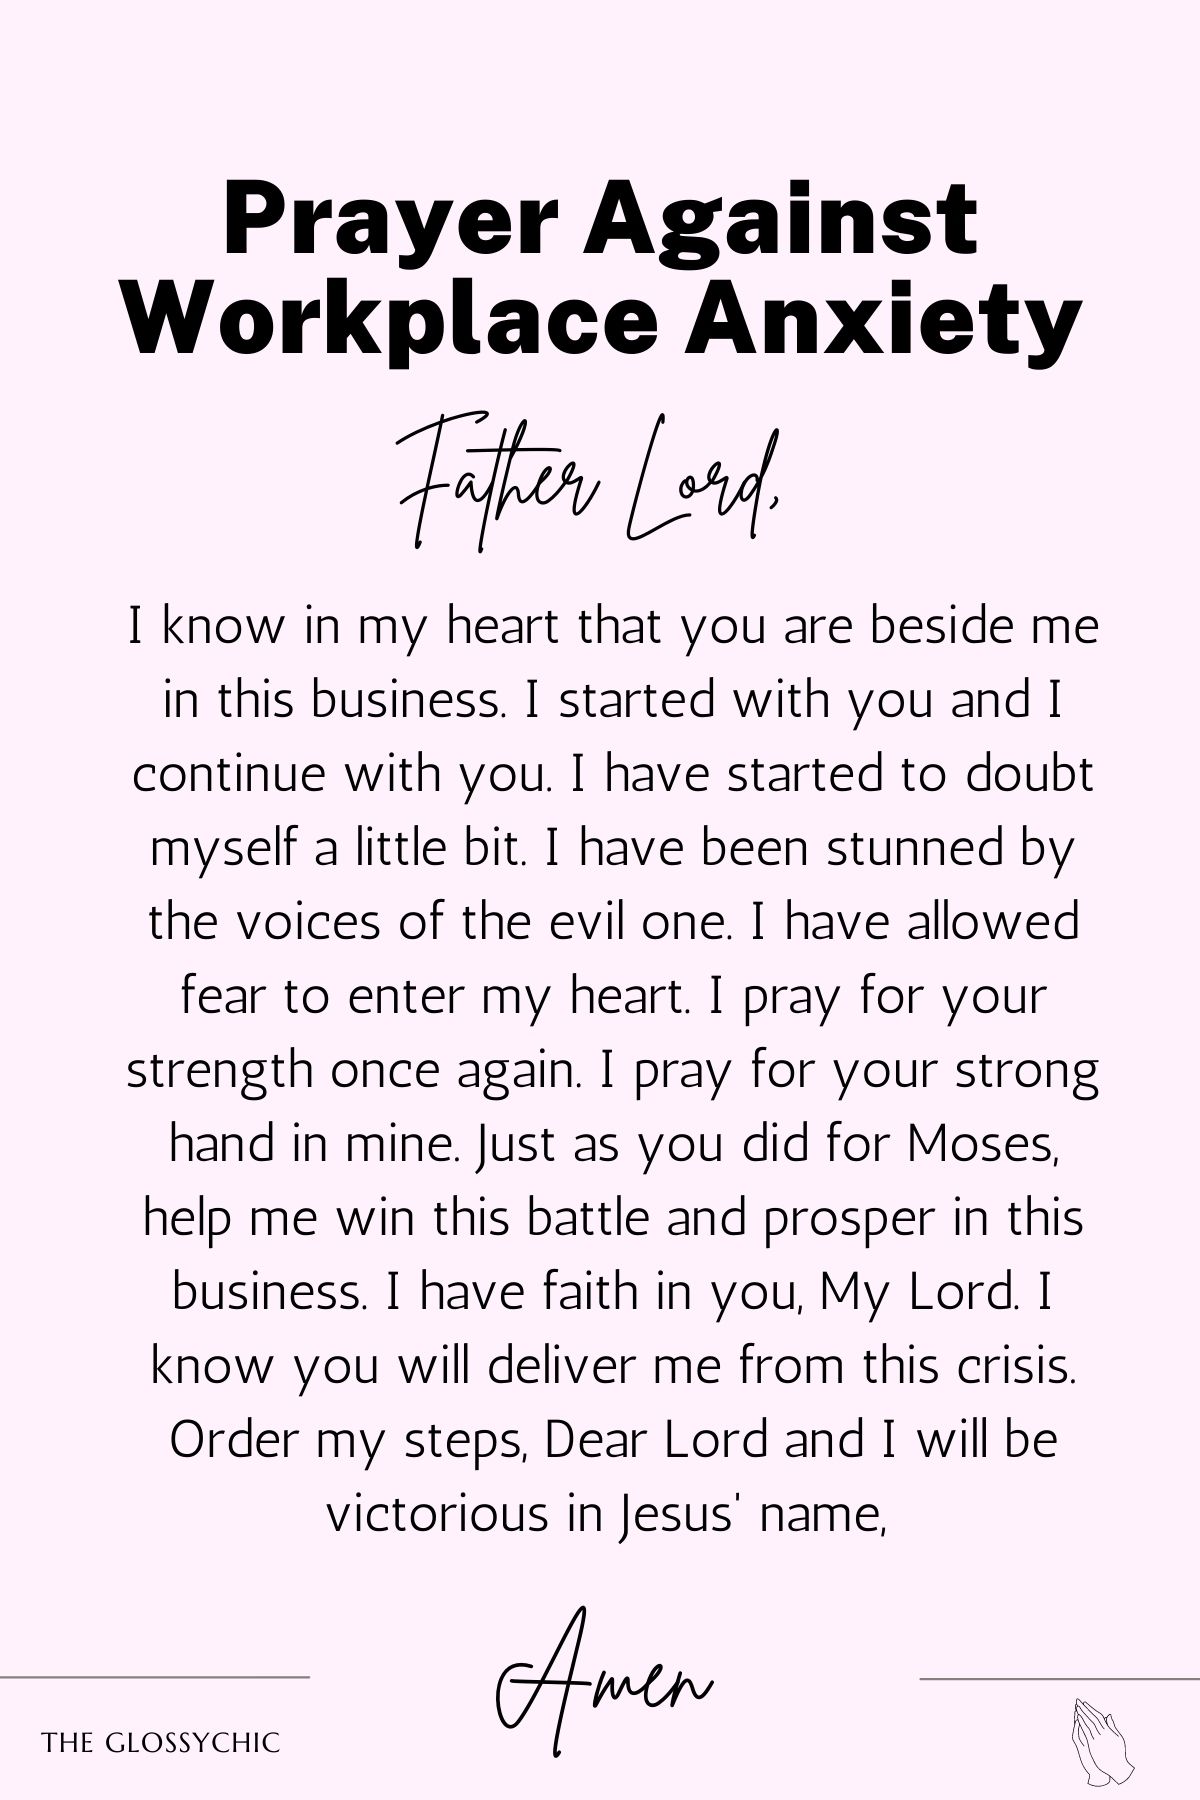 Prayer against workplace anxiety